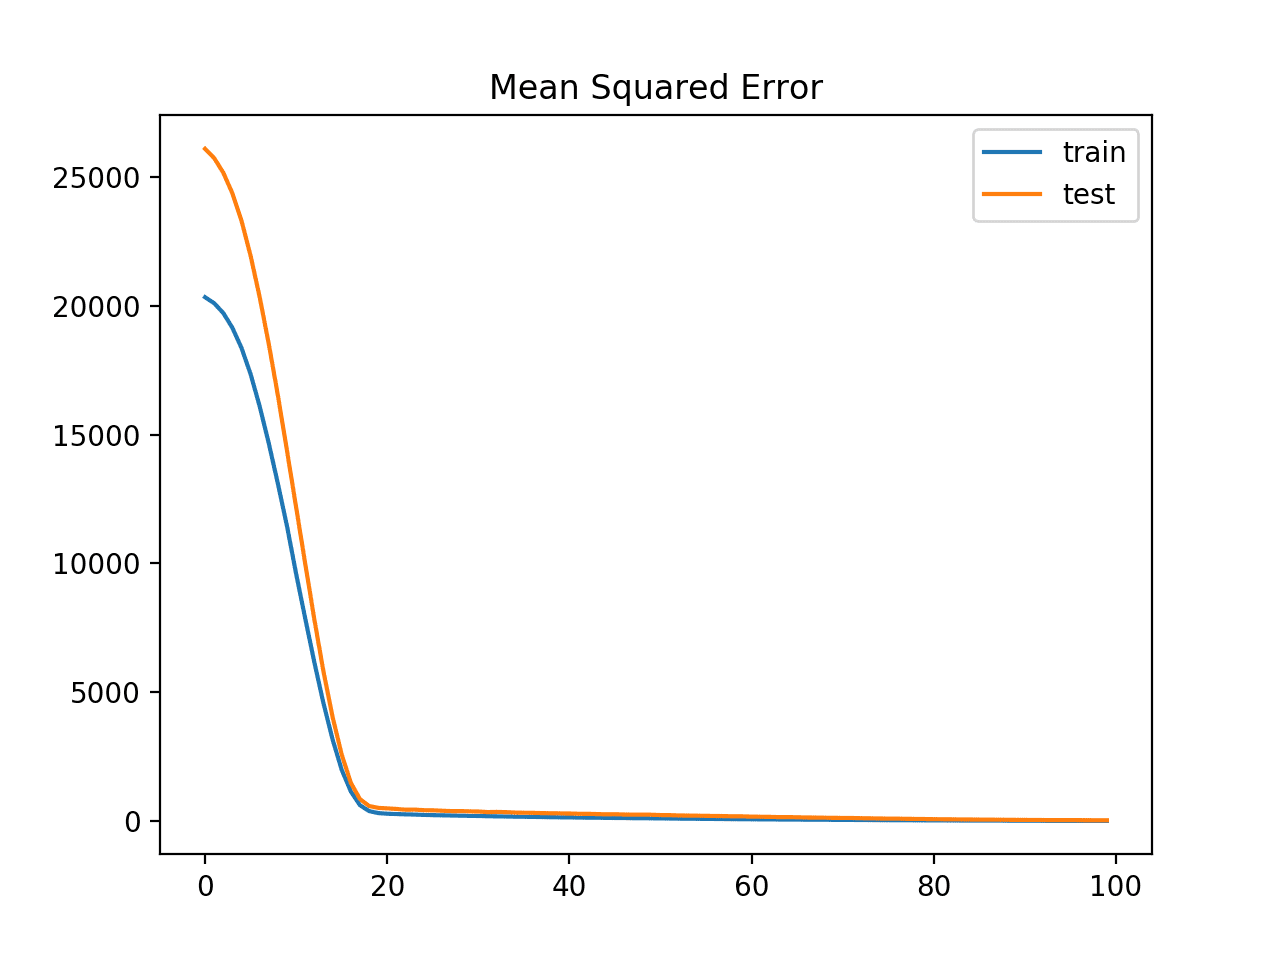 Line Plot of Mean Squared Error Loss for the Train (blue) and Test (orange) Datasets Over Training Epochs With Gradient Norm Scaling